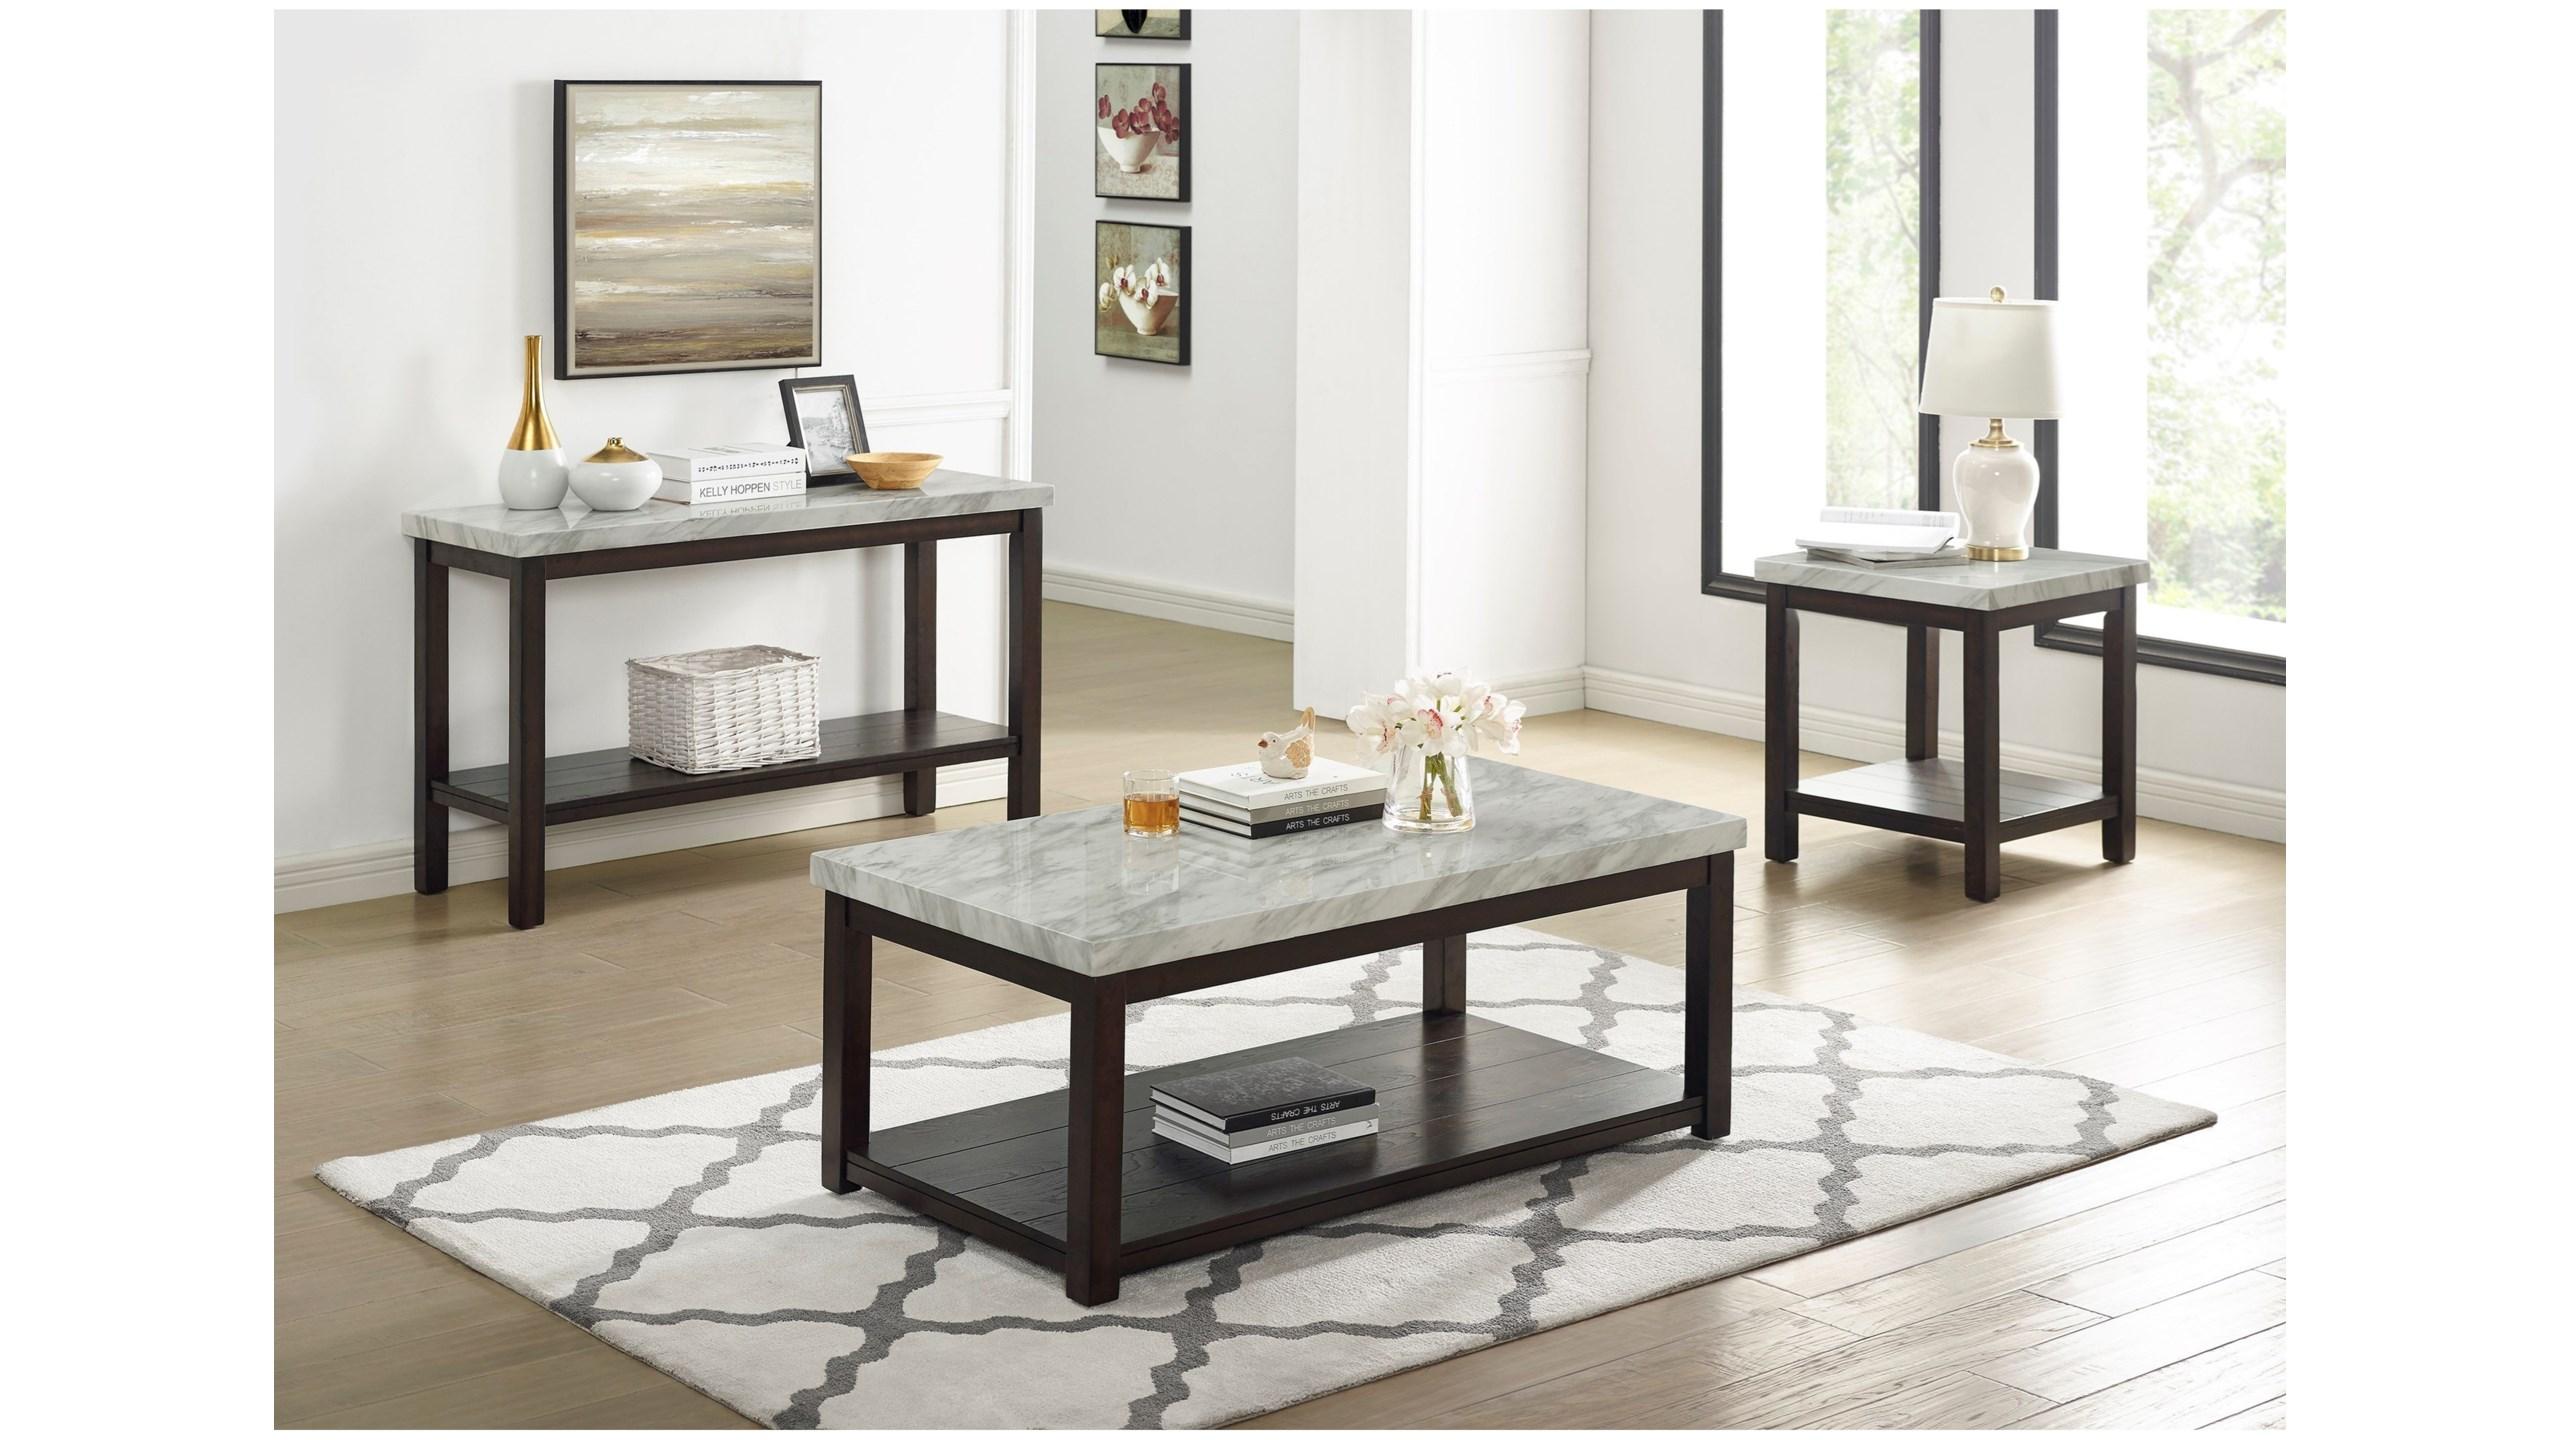 Contemporary, Transitional Coffee Table and 2 End Tables Deacon 4276-01-3pcs in Espresso, White 